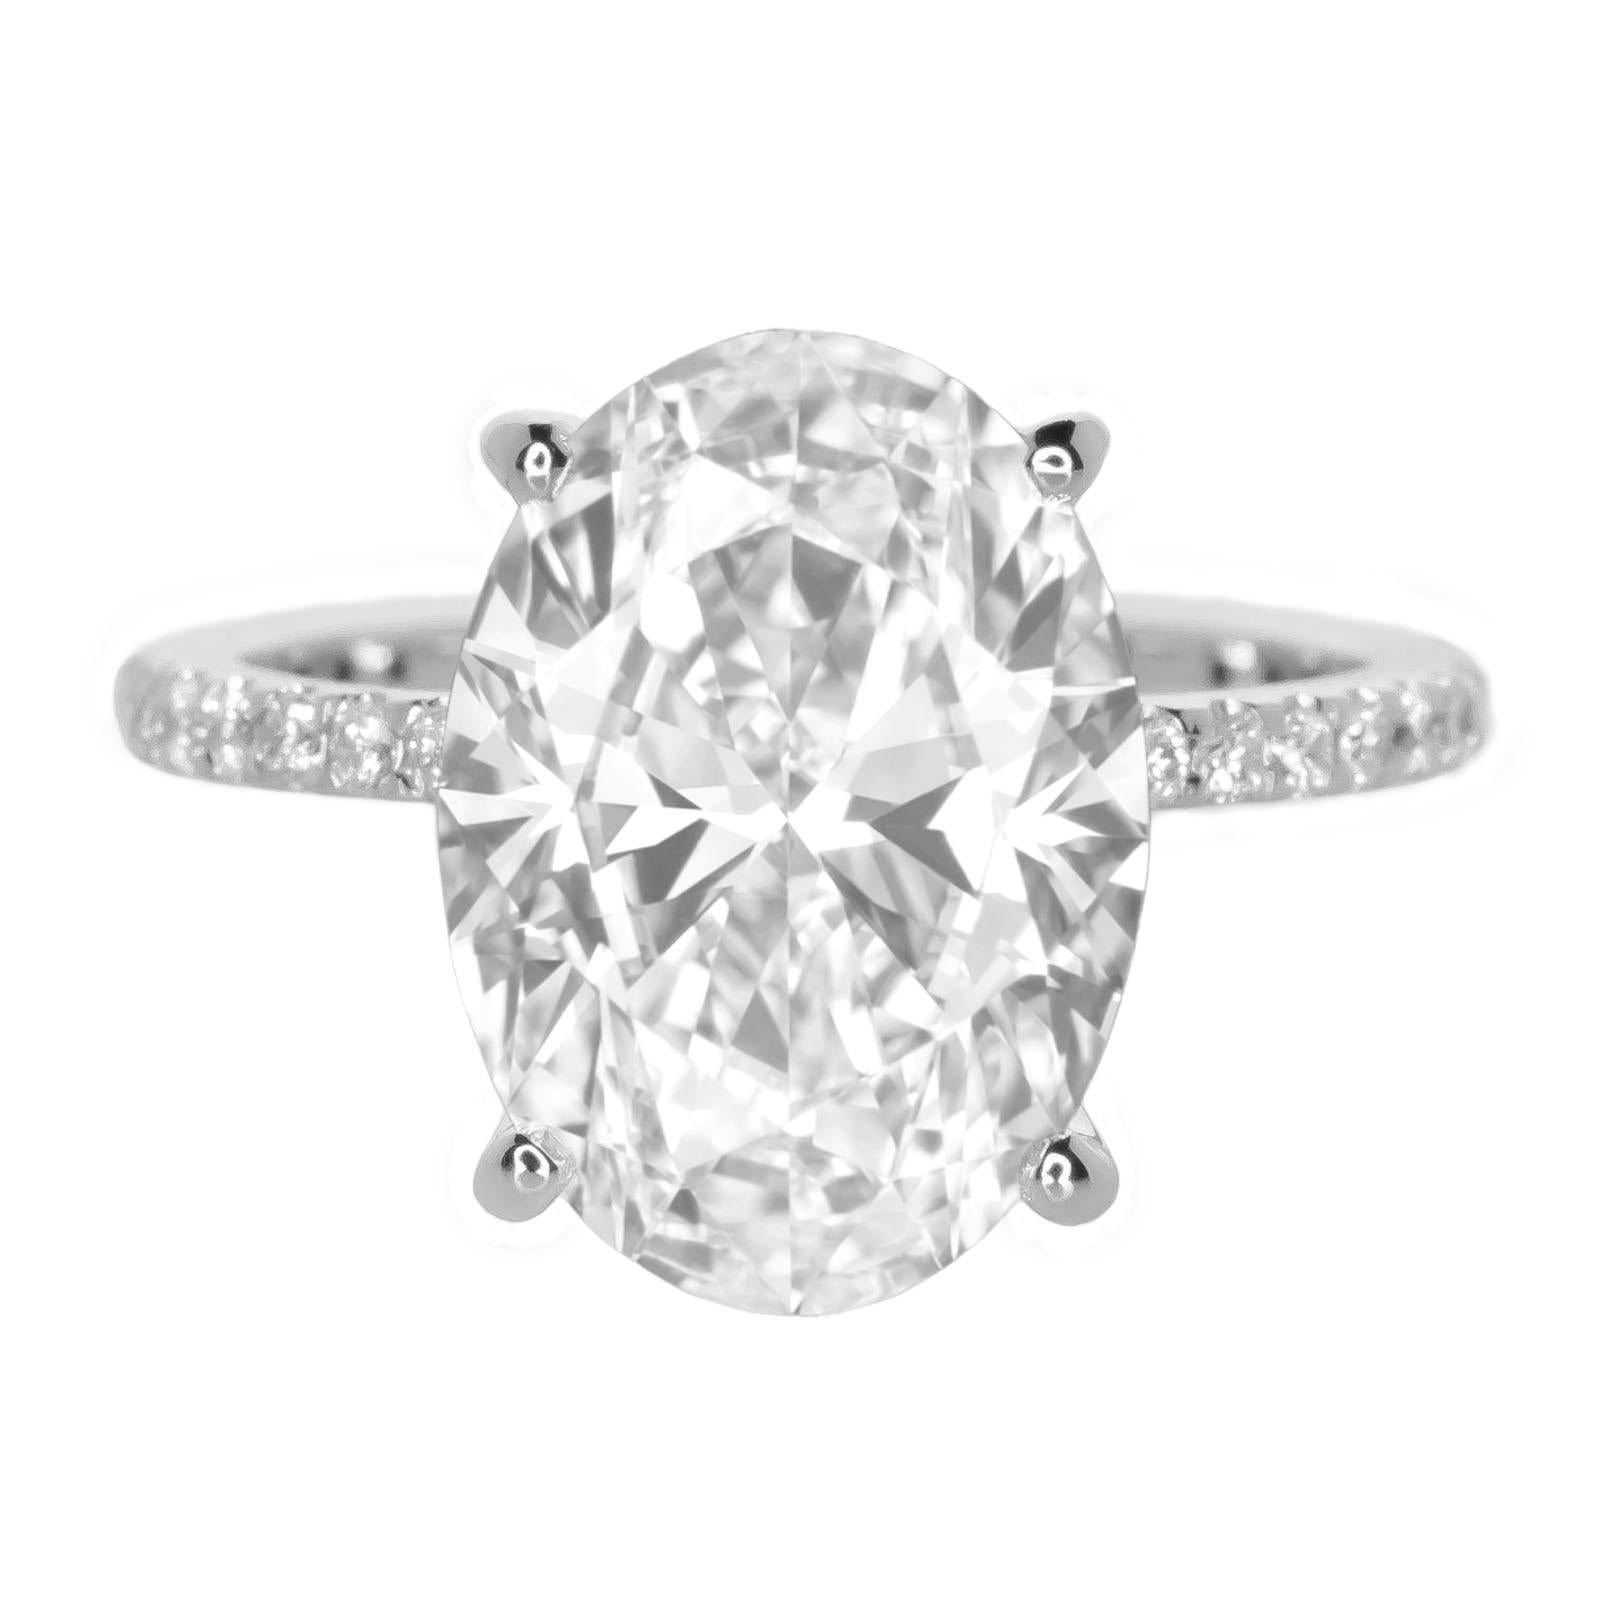 Oval Cut GIA Certified 6 Carat VVS1 Oval Diamond Ring For Sale